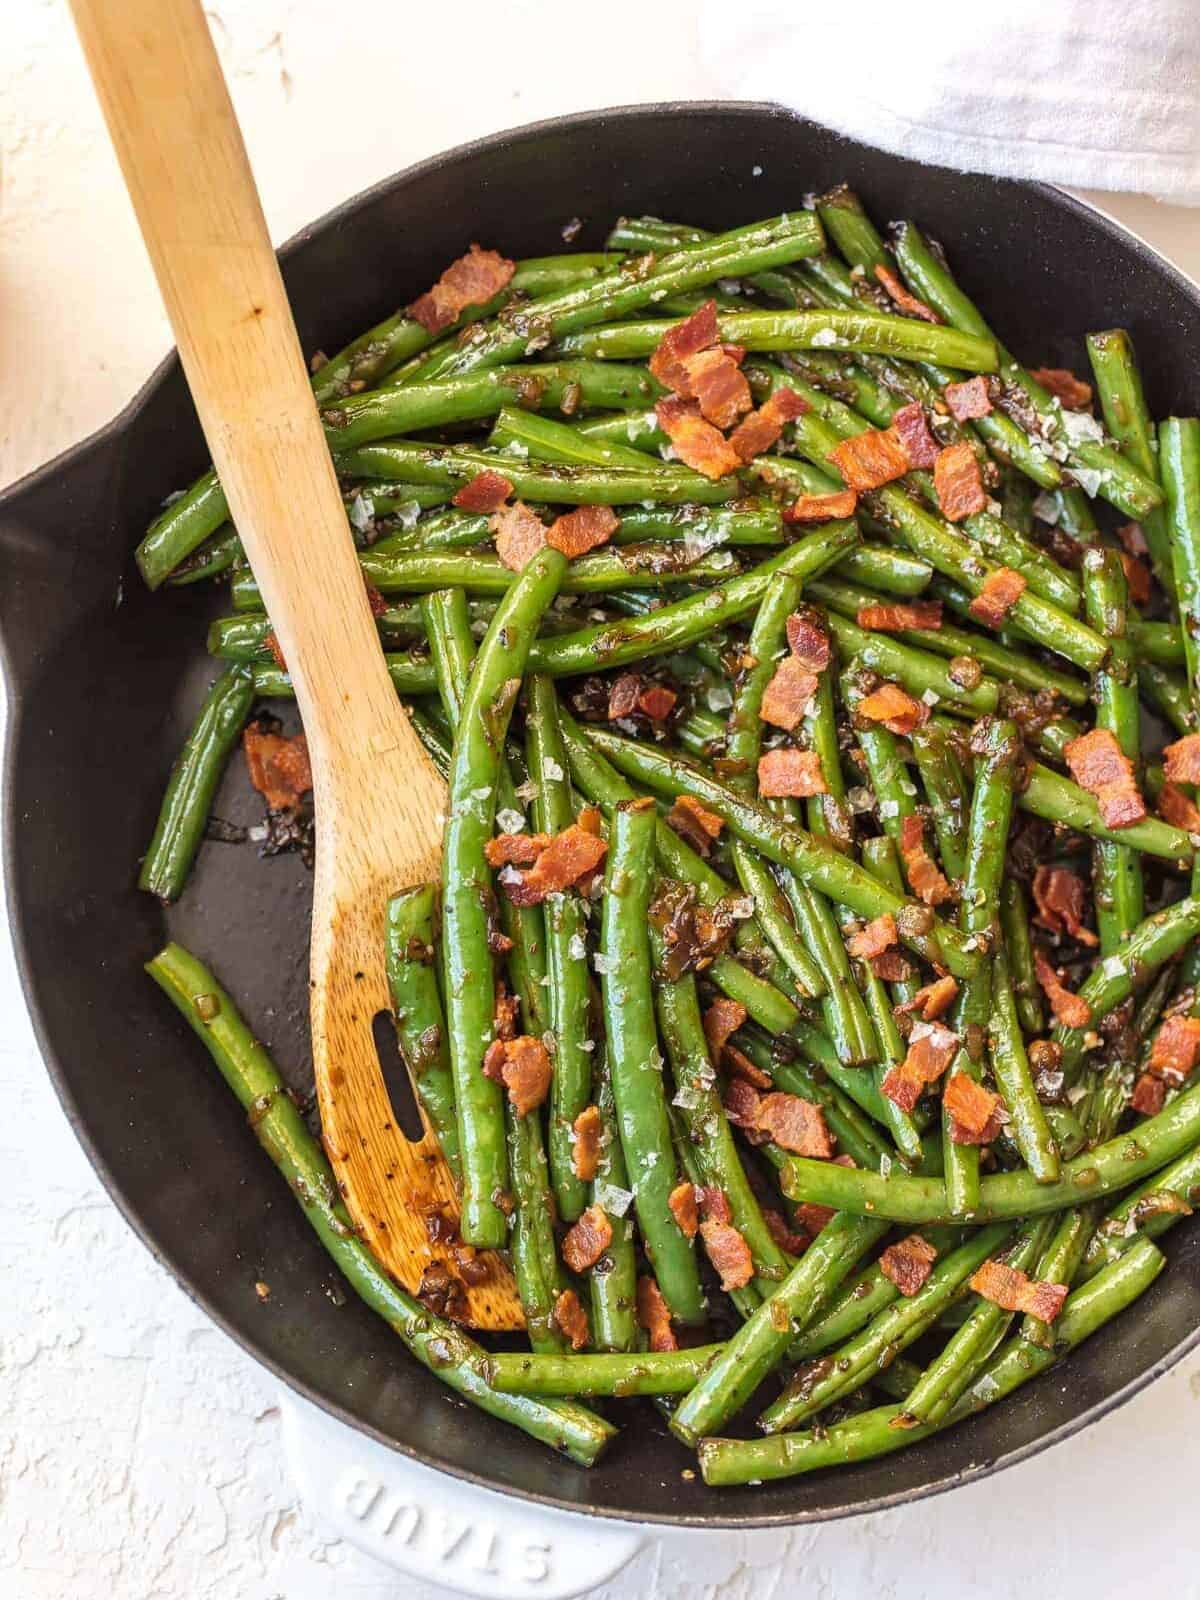 bourbon green beans and bacon in skillet with wooden spoon.